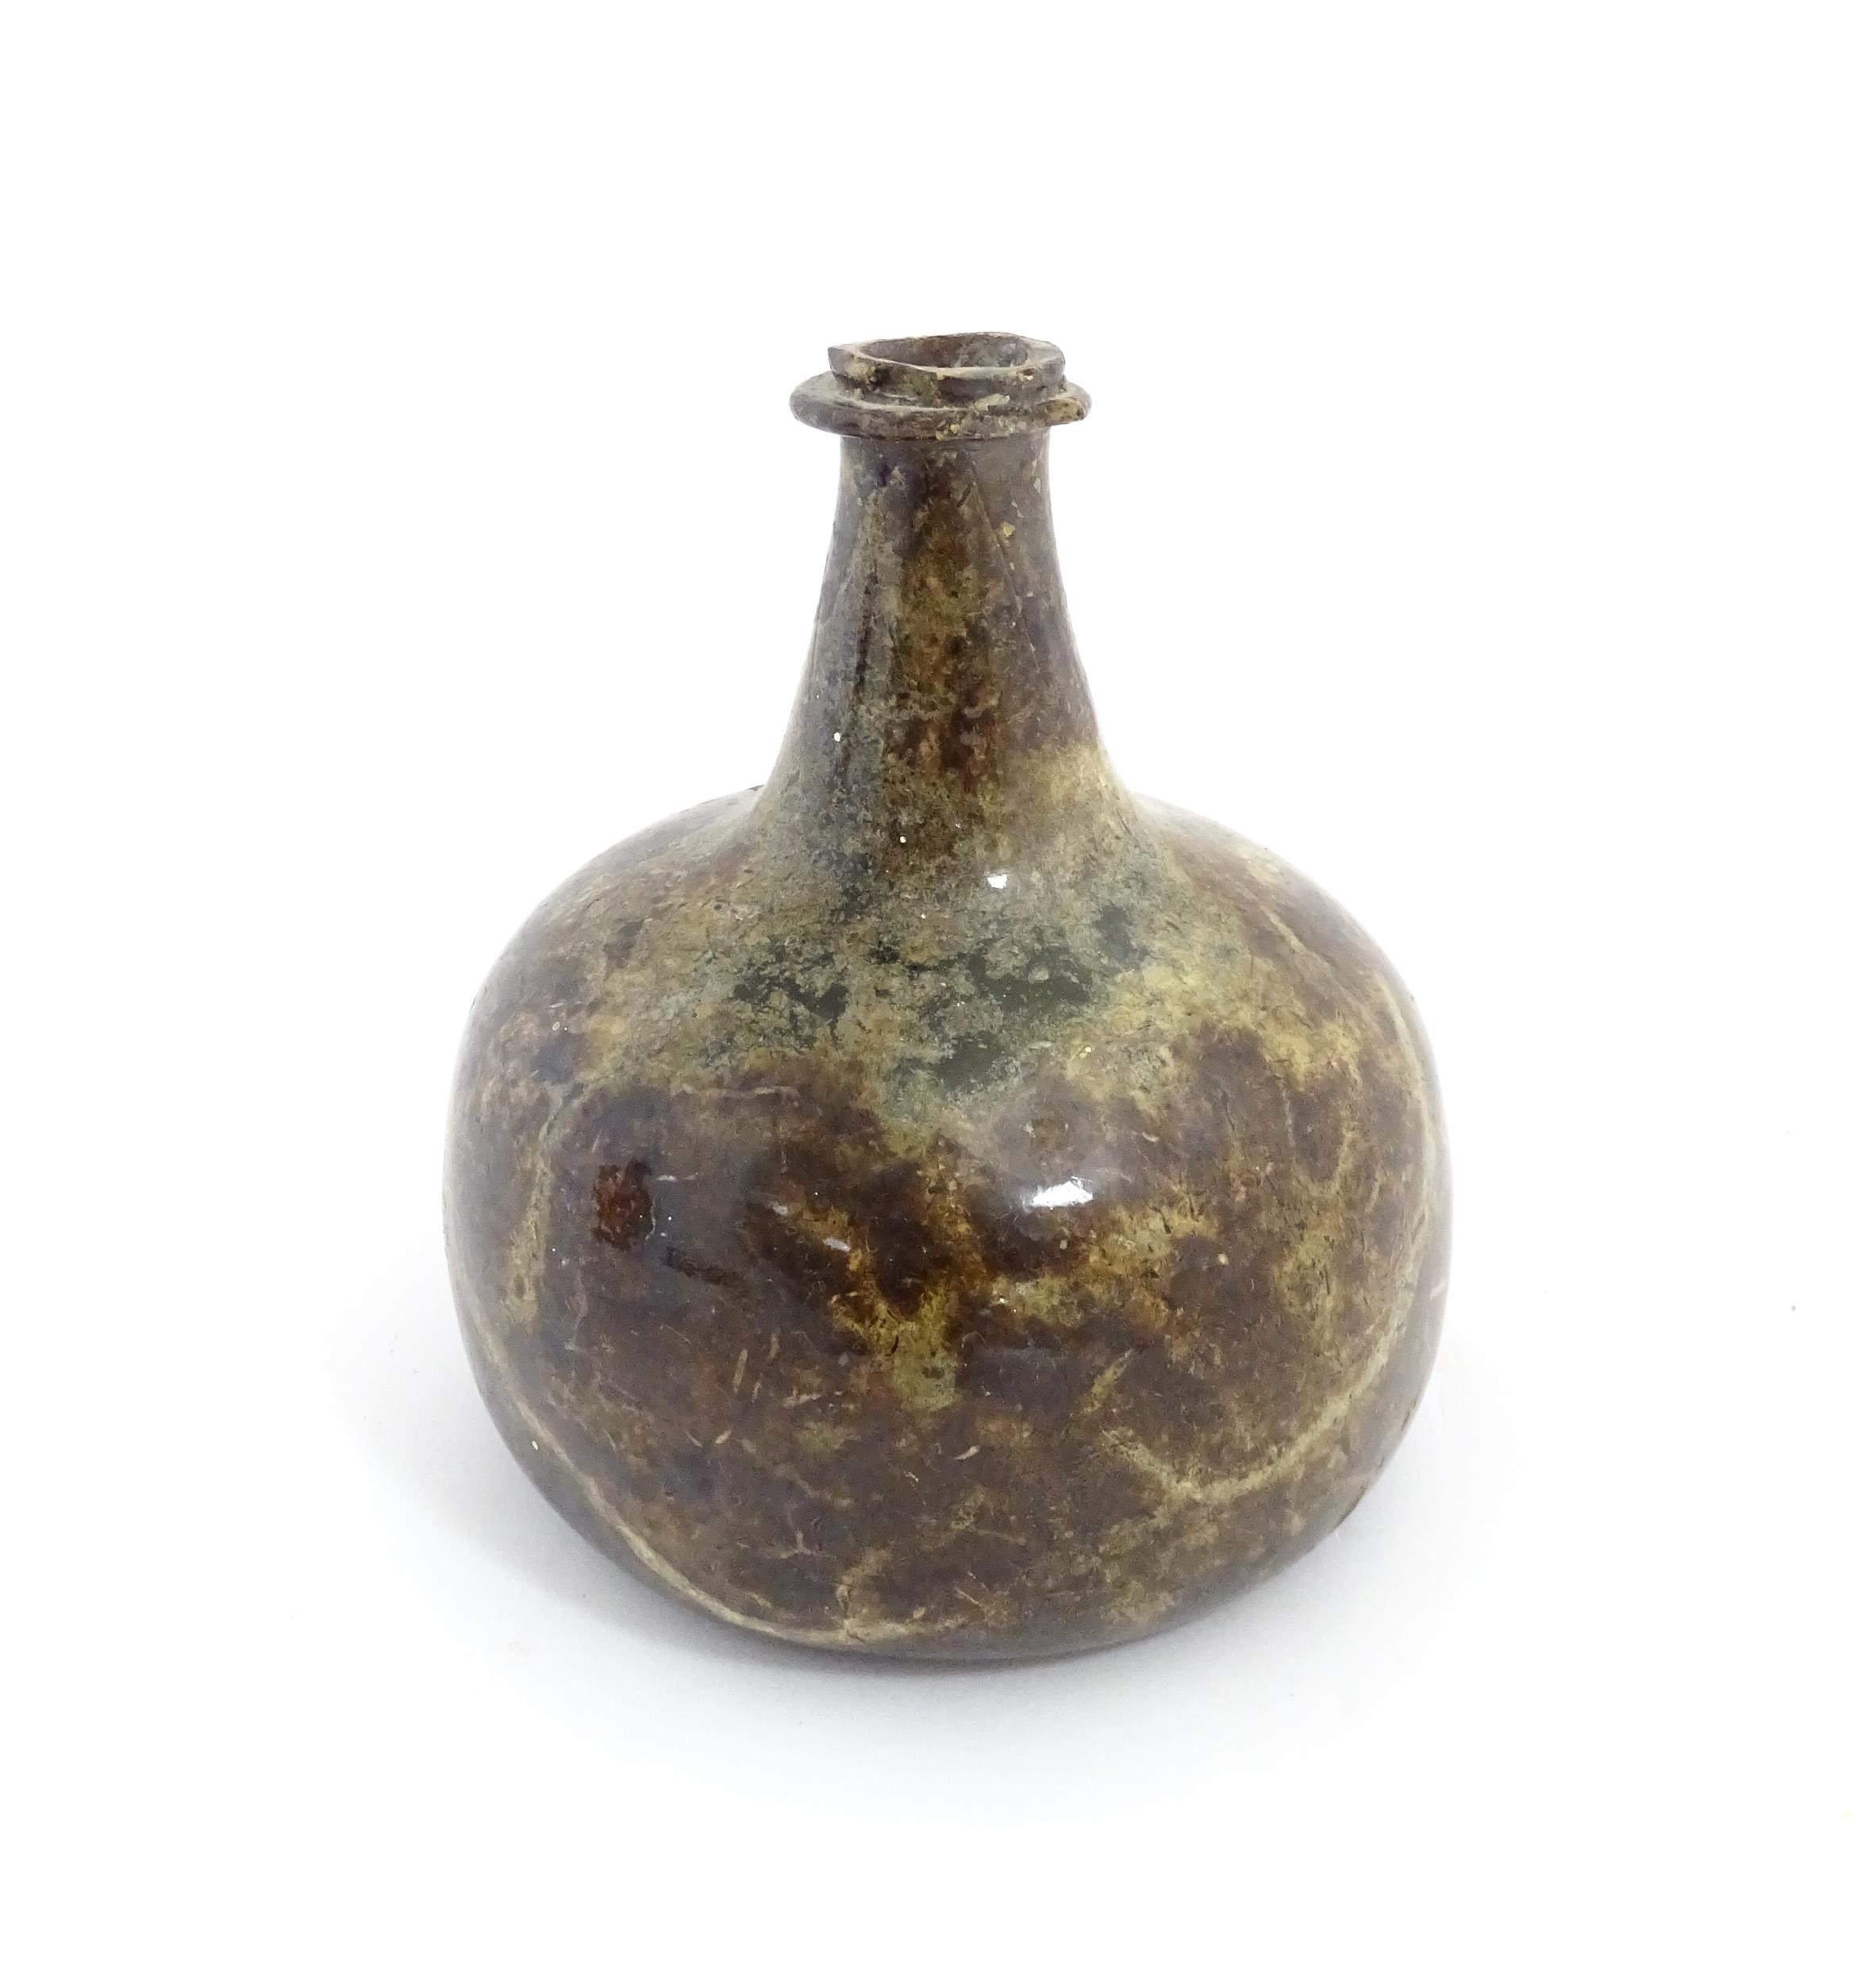 A late 18thC / early 19thC English dark olive green glass onion shape wine bottle. Approx. 6" high - Image 4 of 6